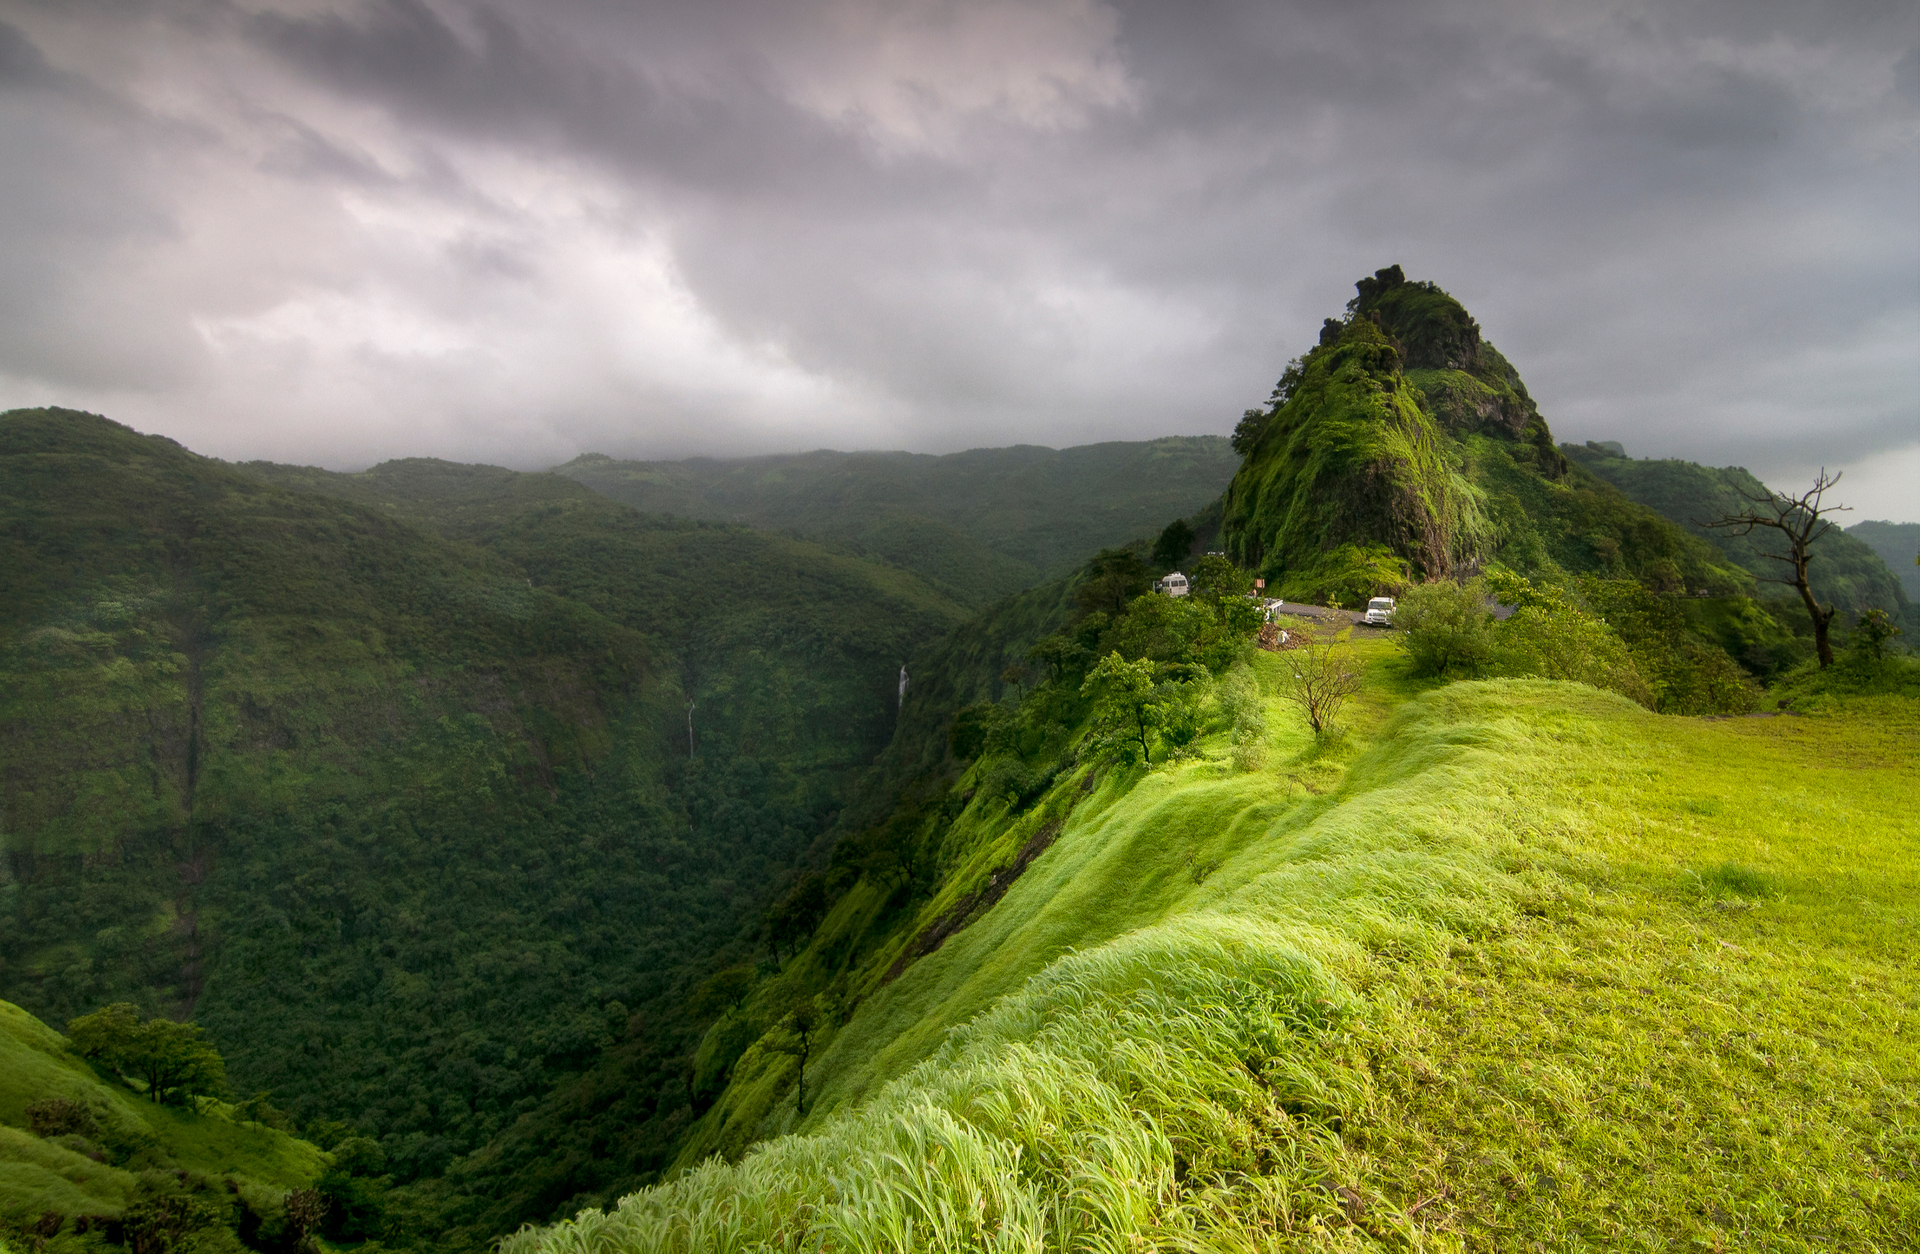 Photo of the Western Ghats showing mountains covered in green vegetation and trees and grey clouds in the sky